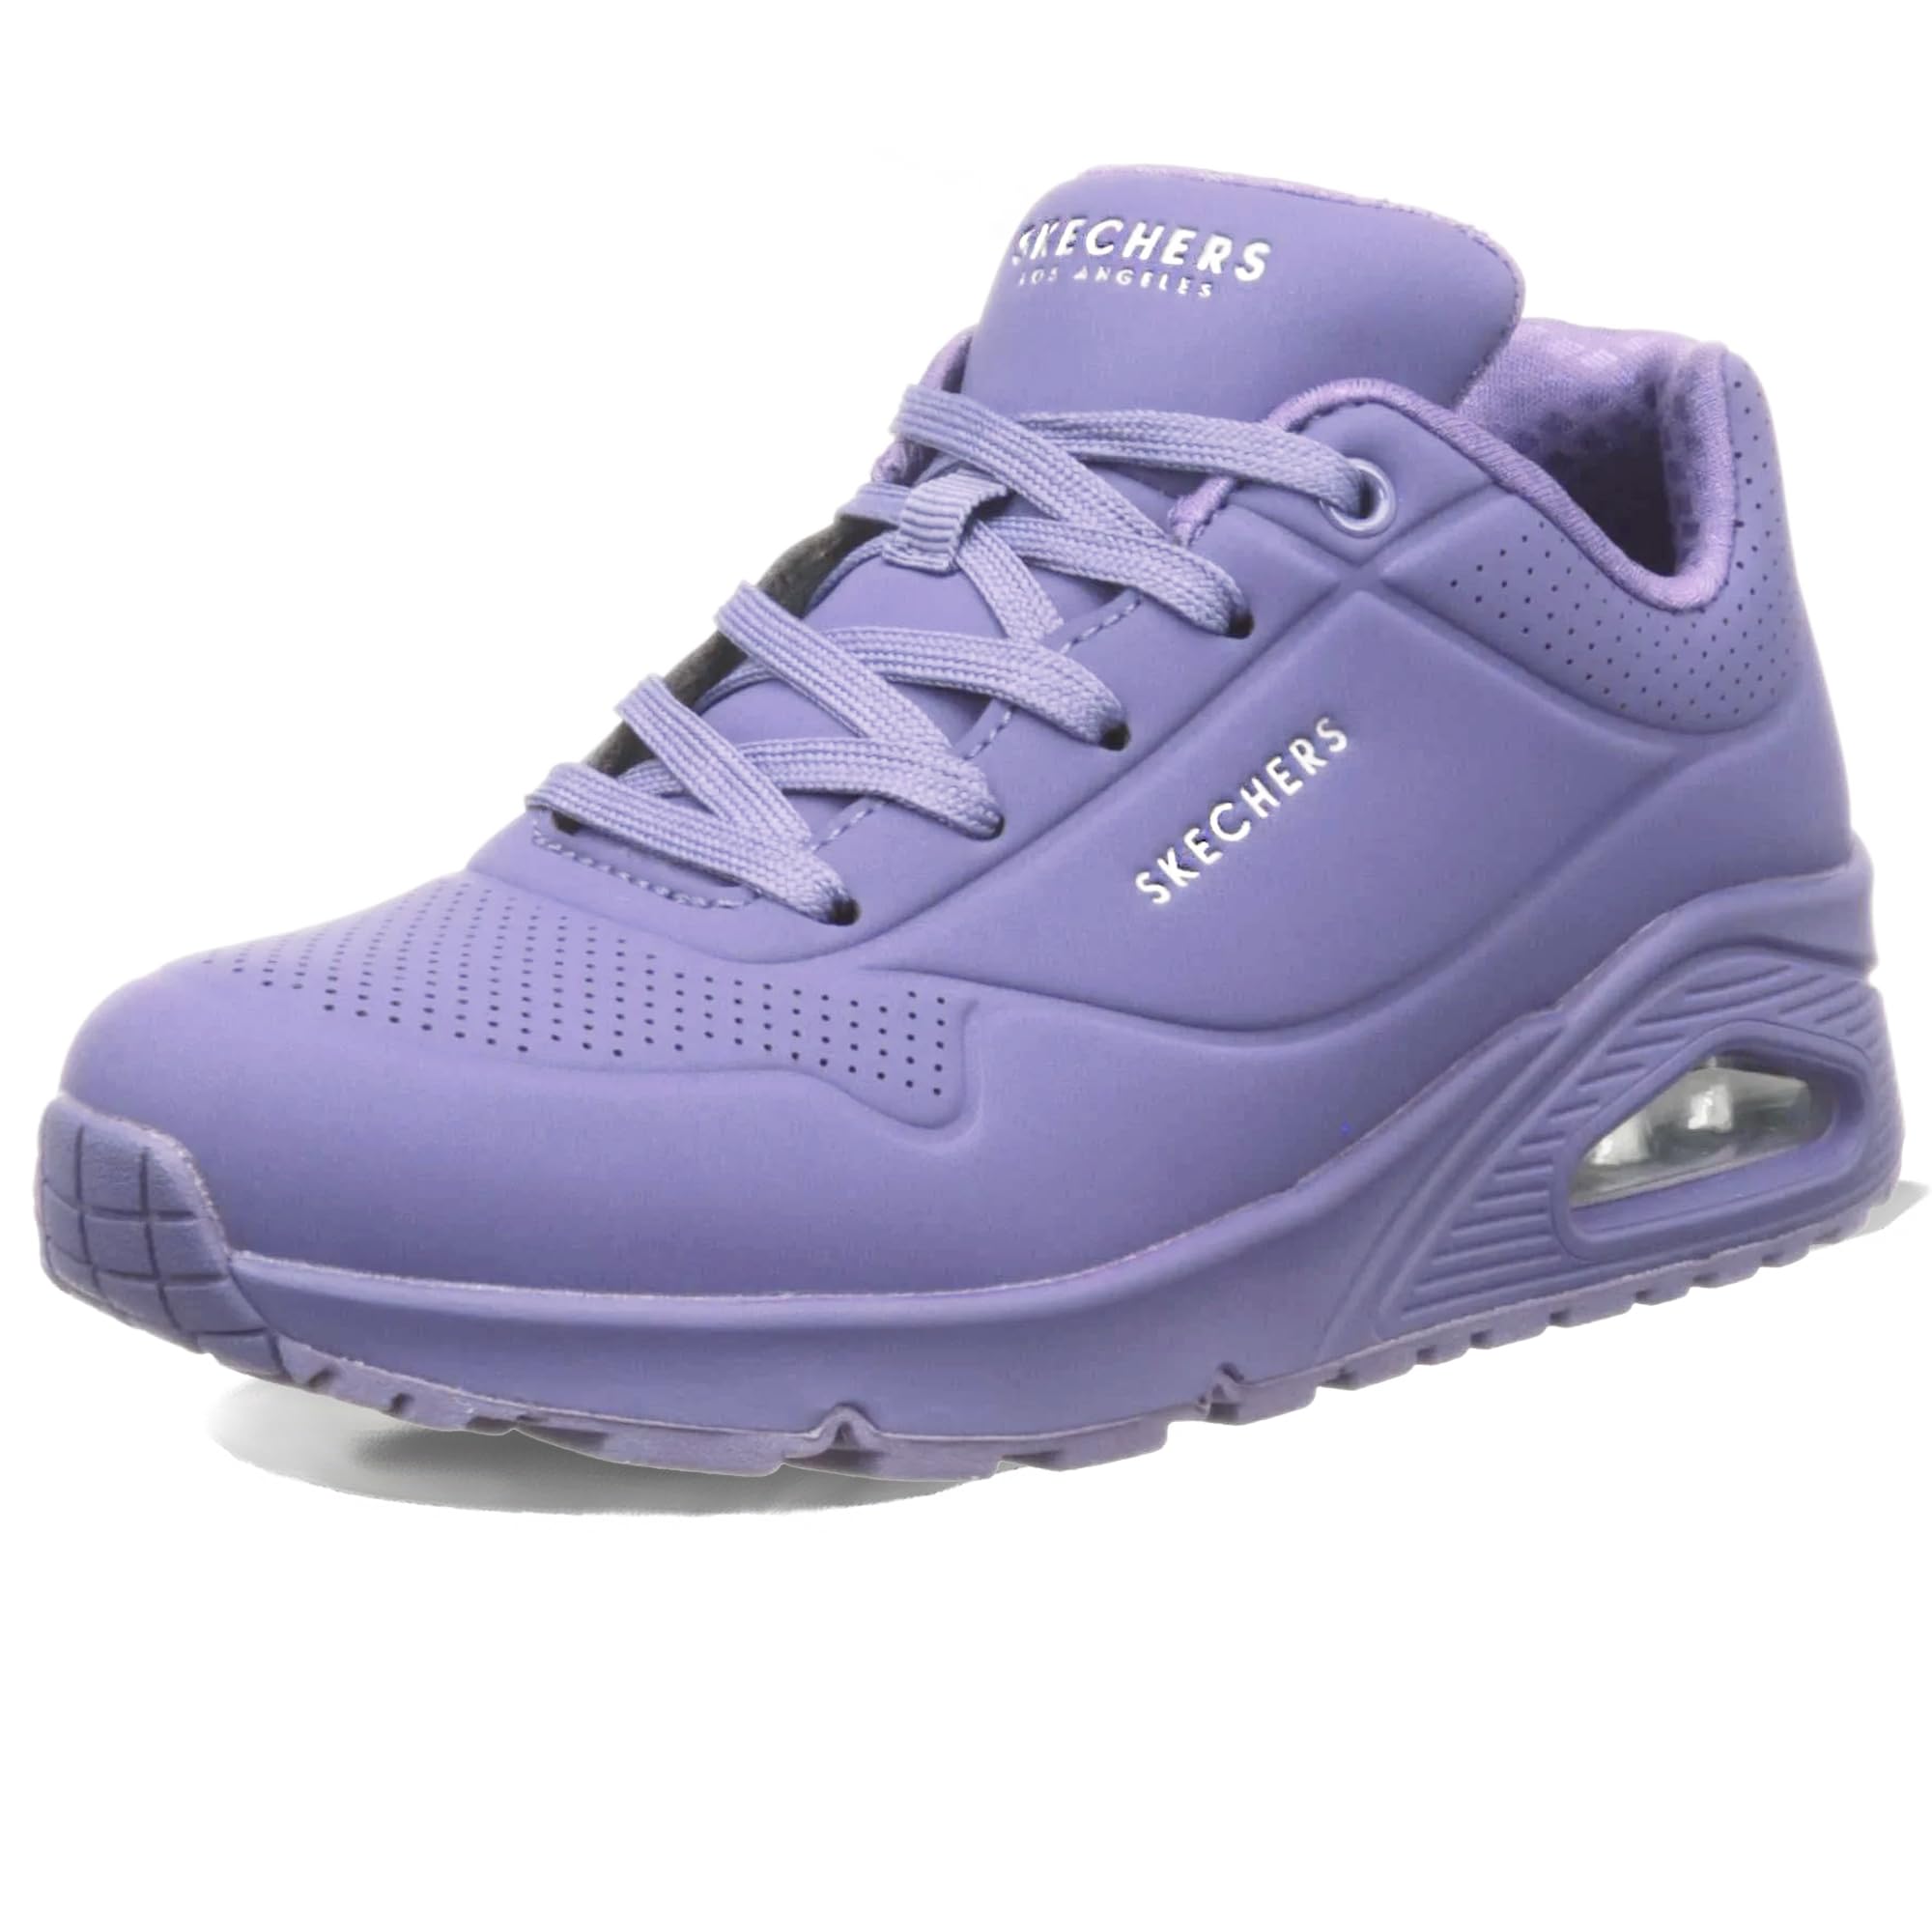 Skechers Women's Uno-Stand on Air Sneaker, Lilac, 8